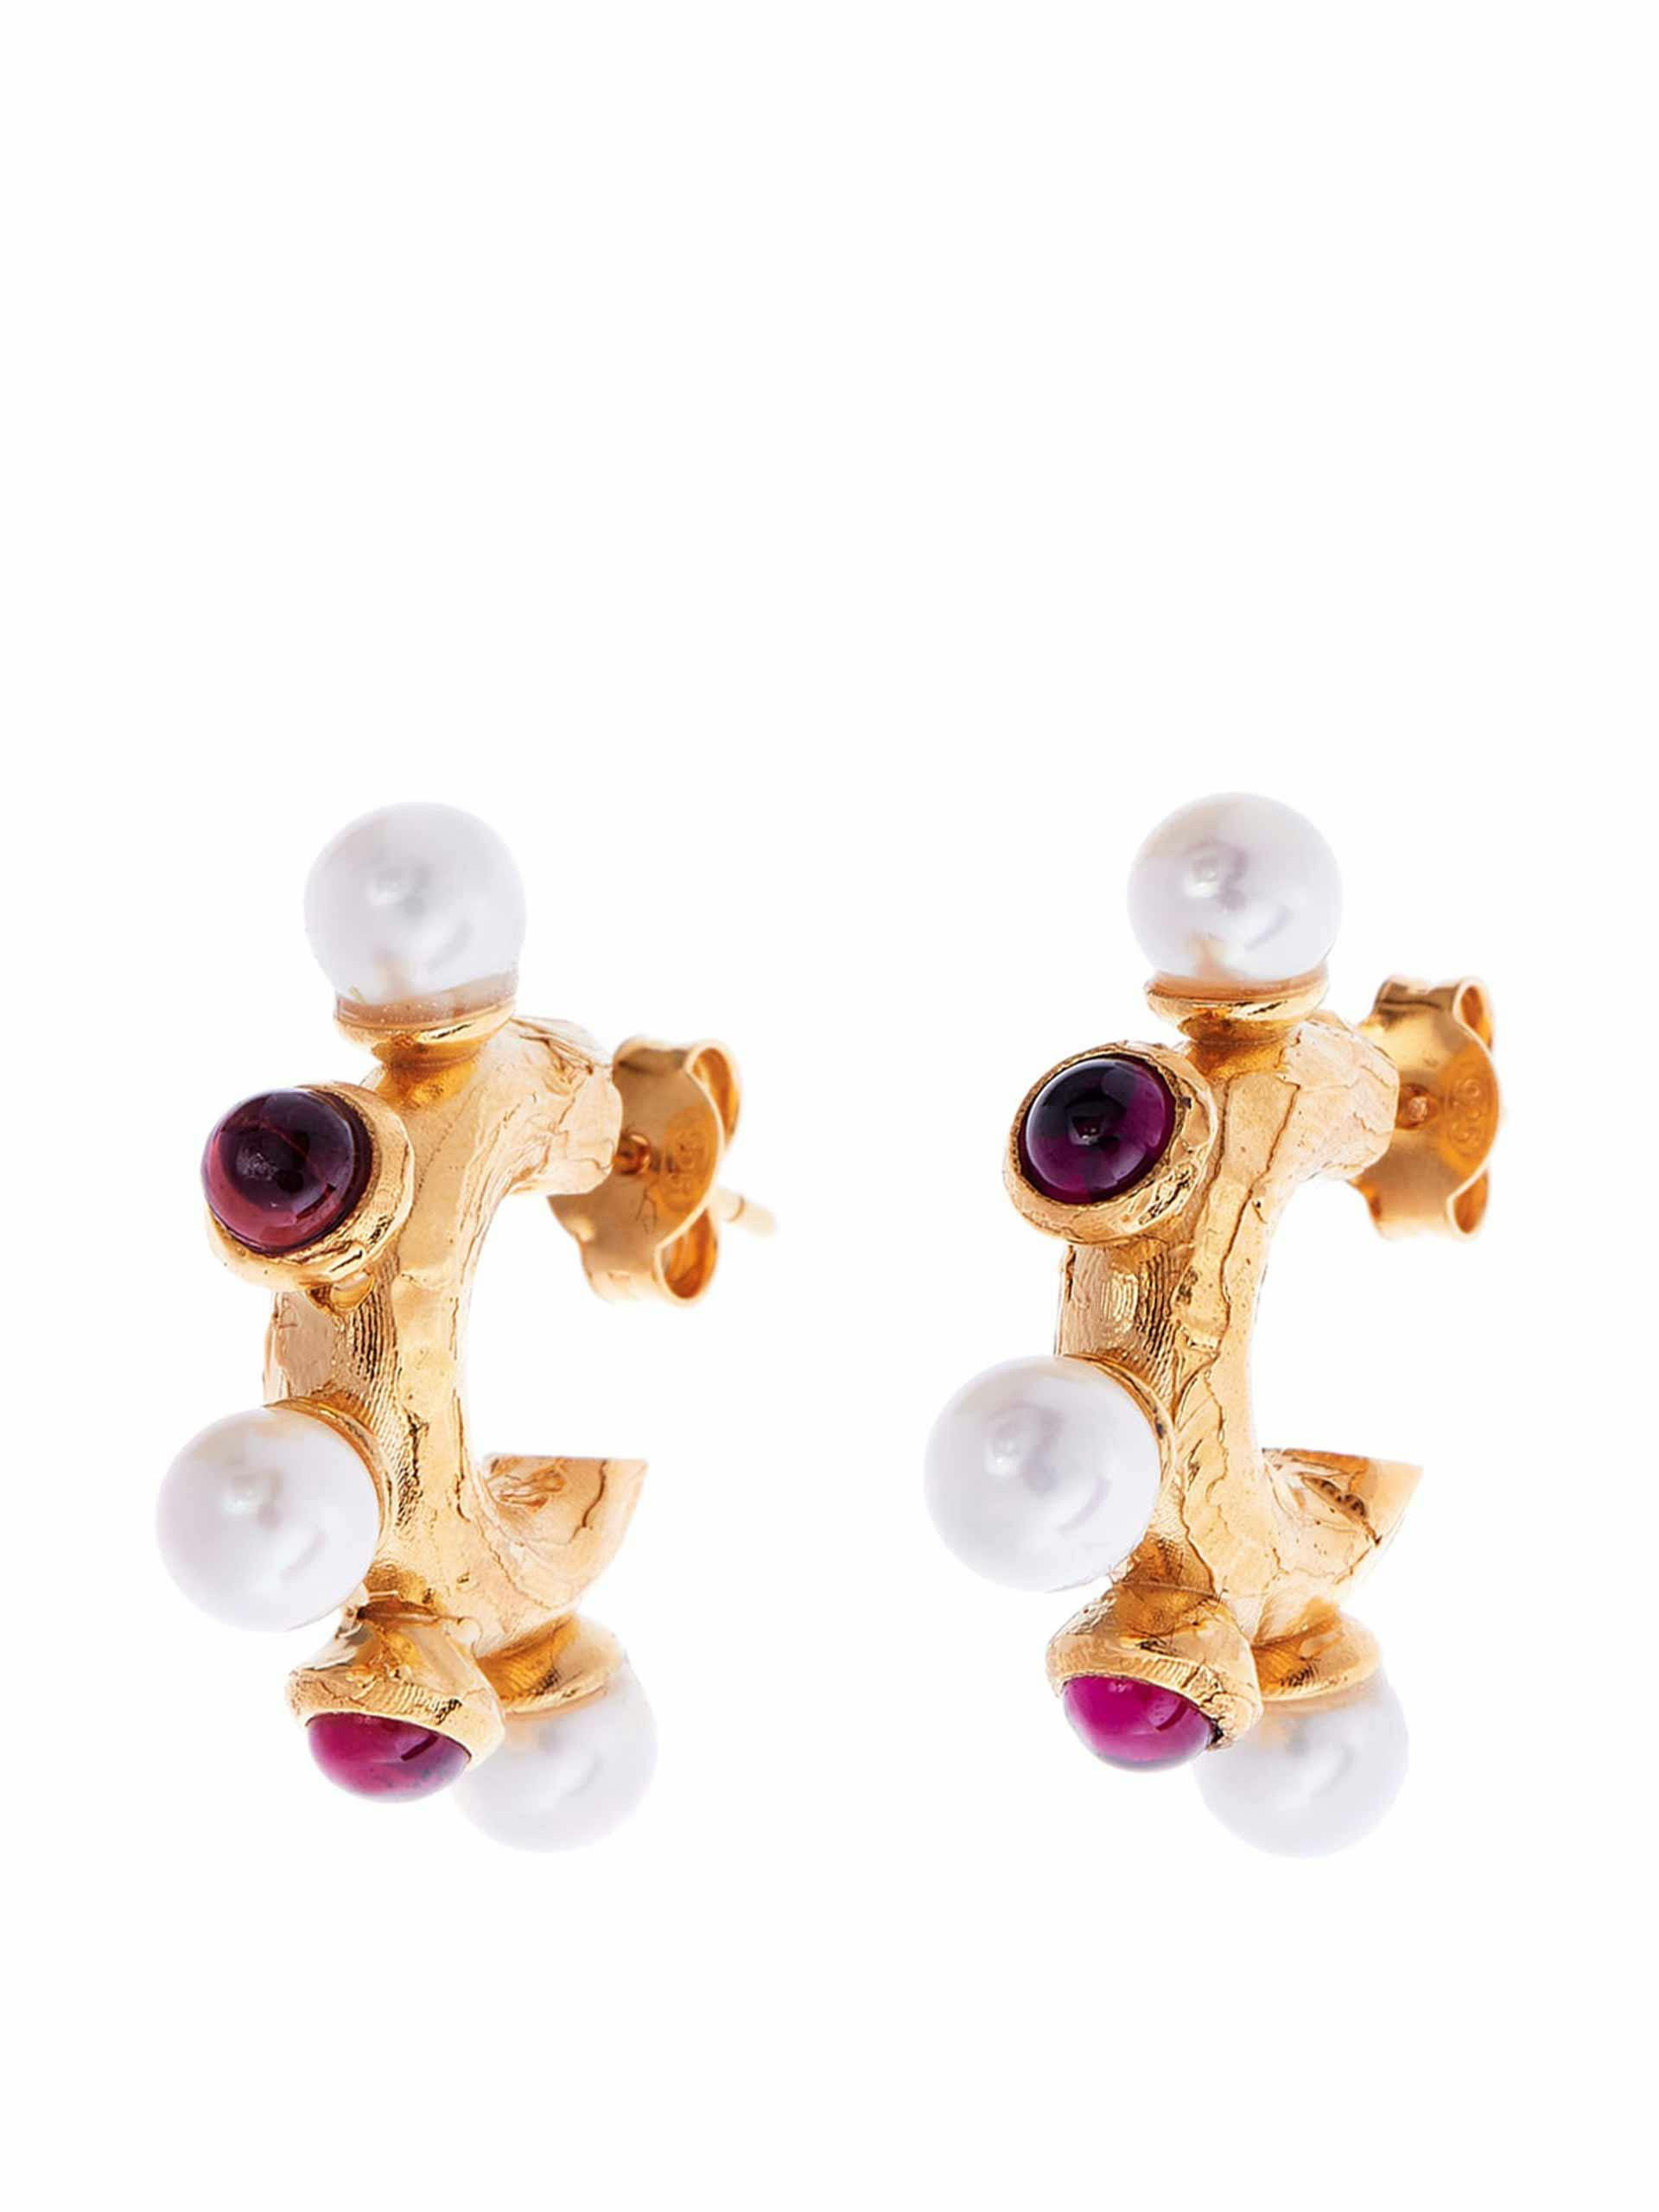 The Nocturnal Desire pearl and gold earrings